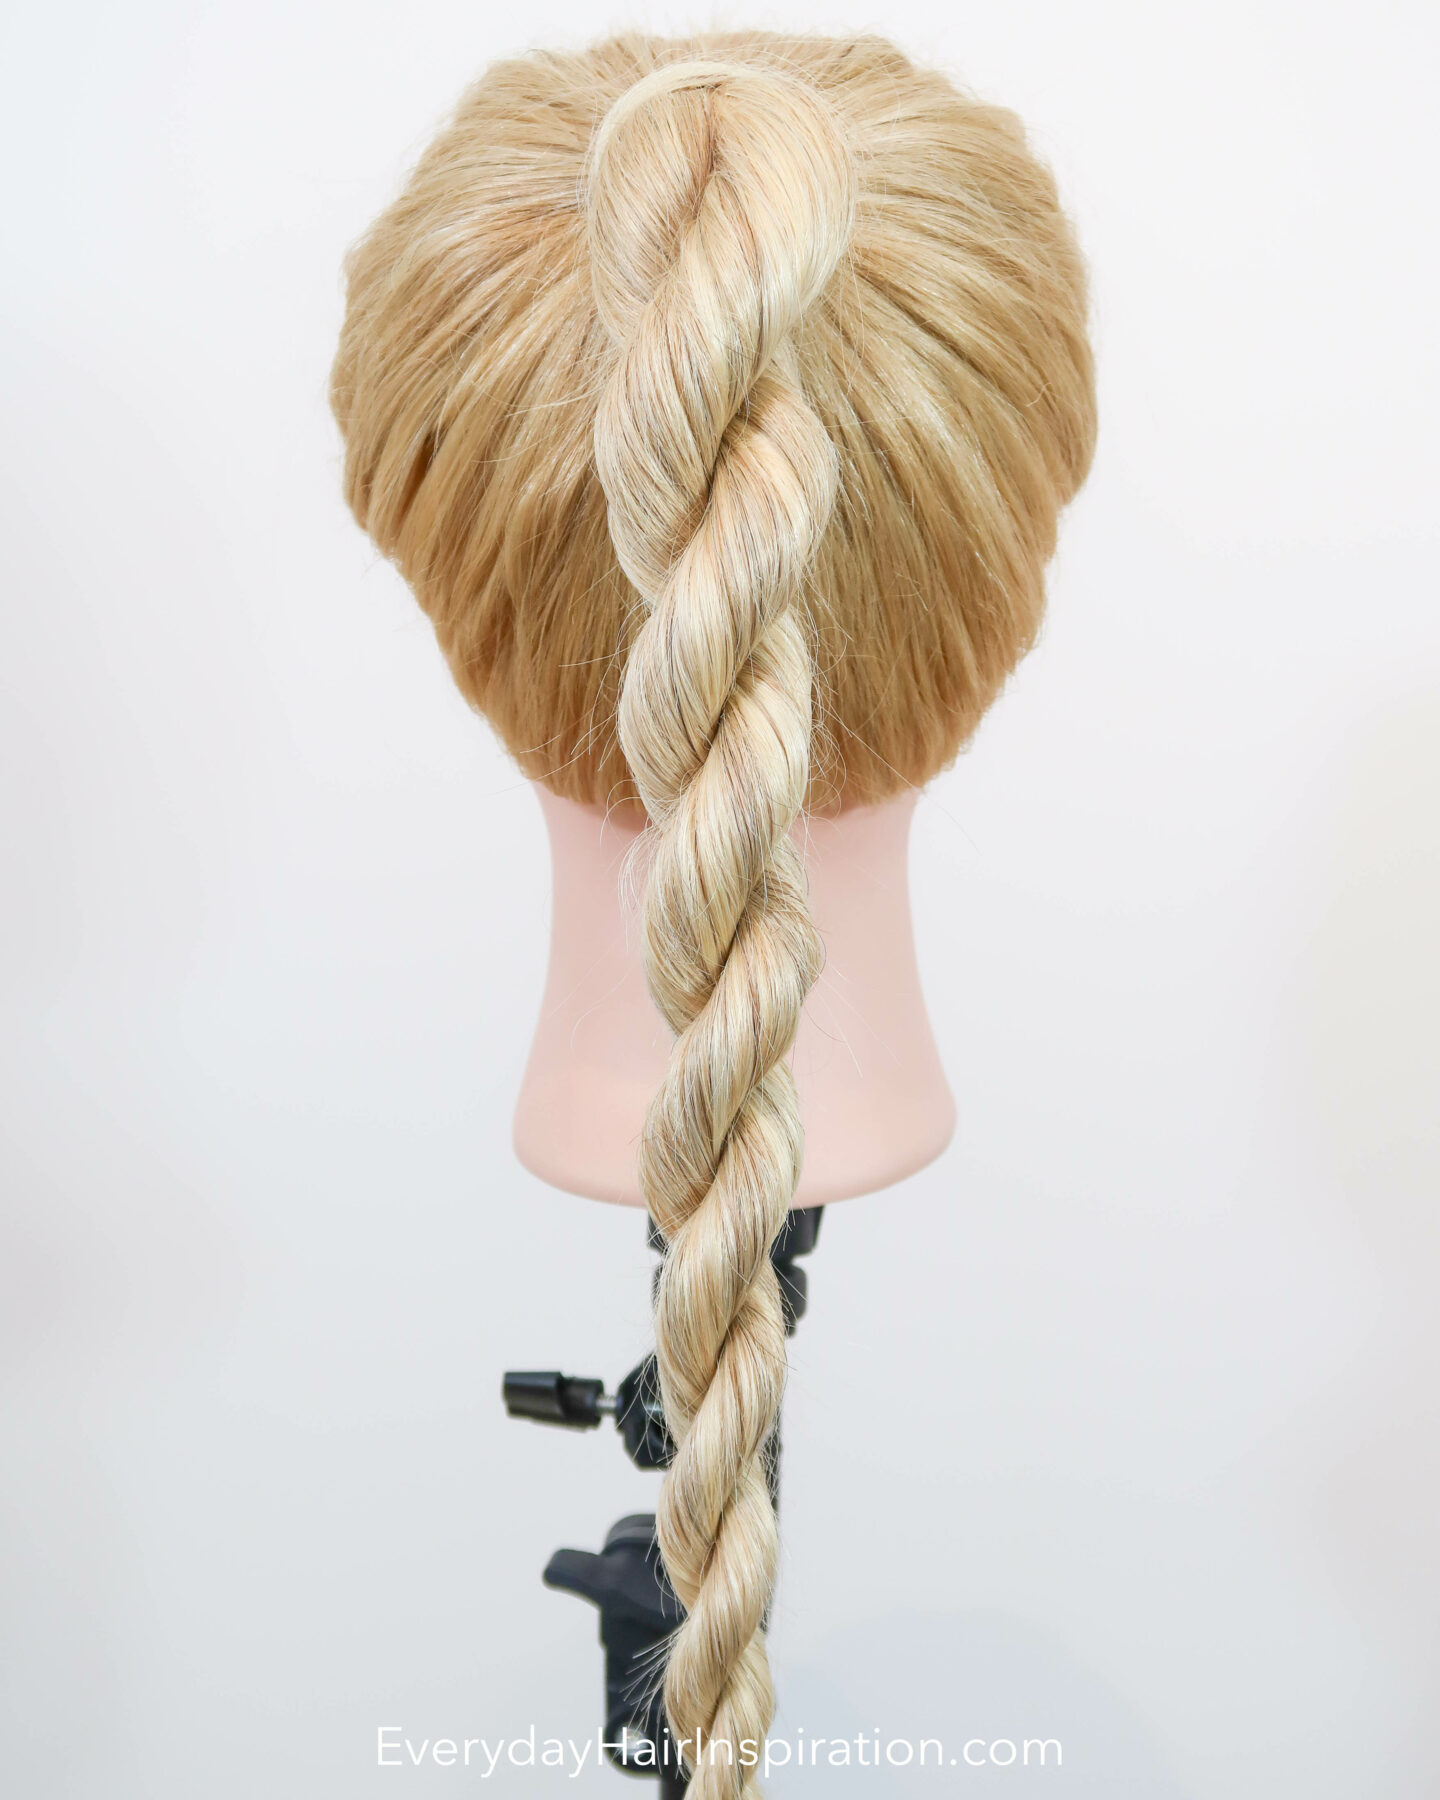 Blonde hairdresser doll seen from the back with a high ponytail with a rope braid, braided in the hair. 